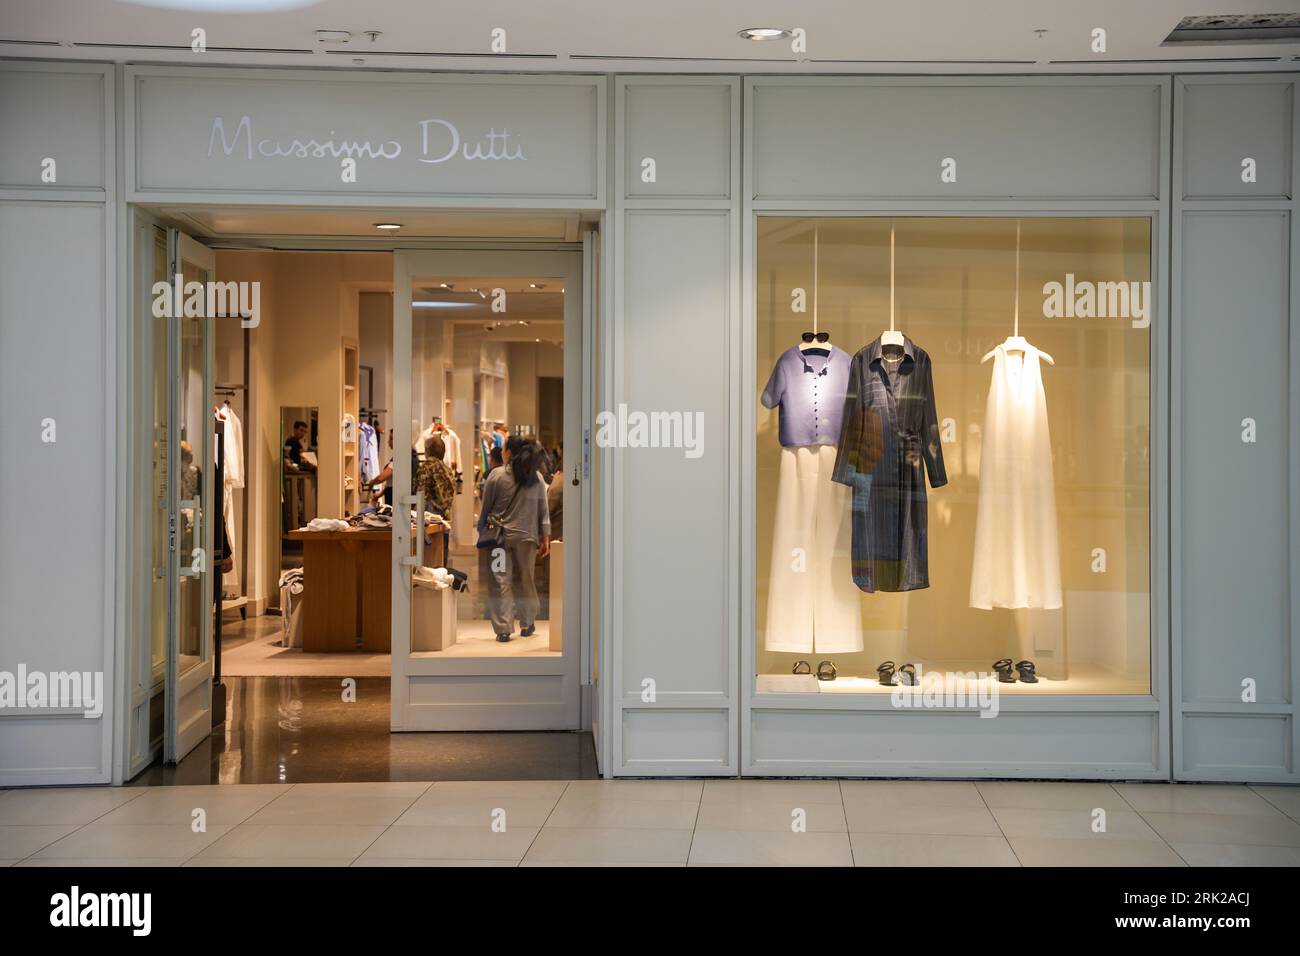 Massimo dutti store hi-res stock photography and images - Alamy